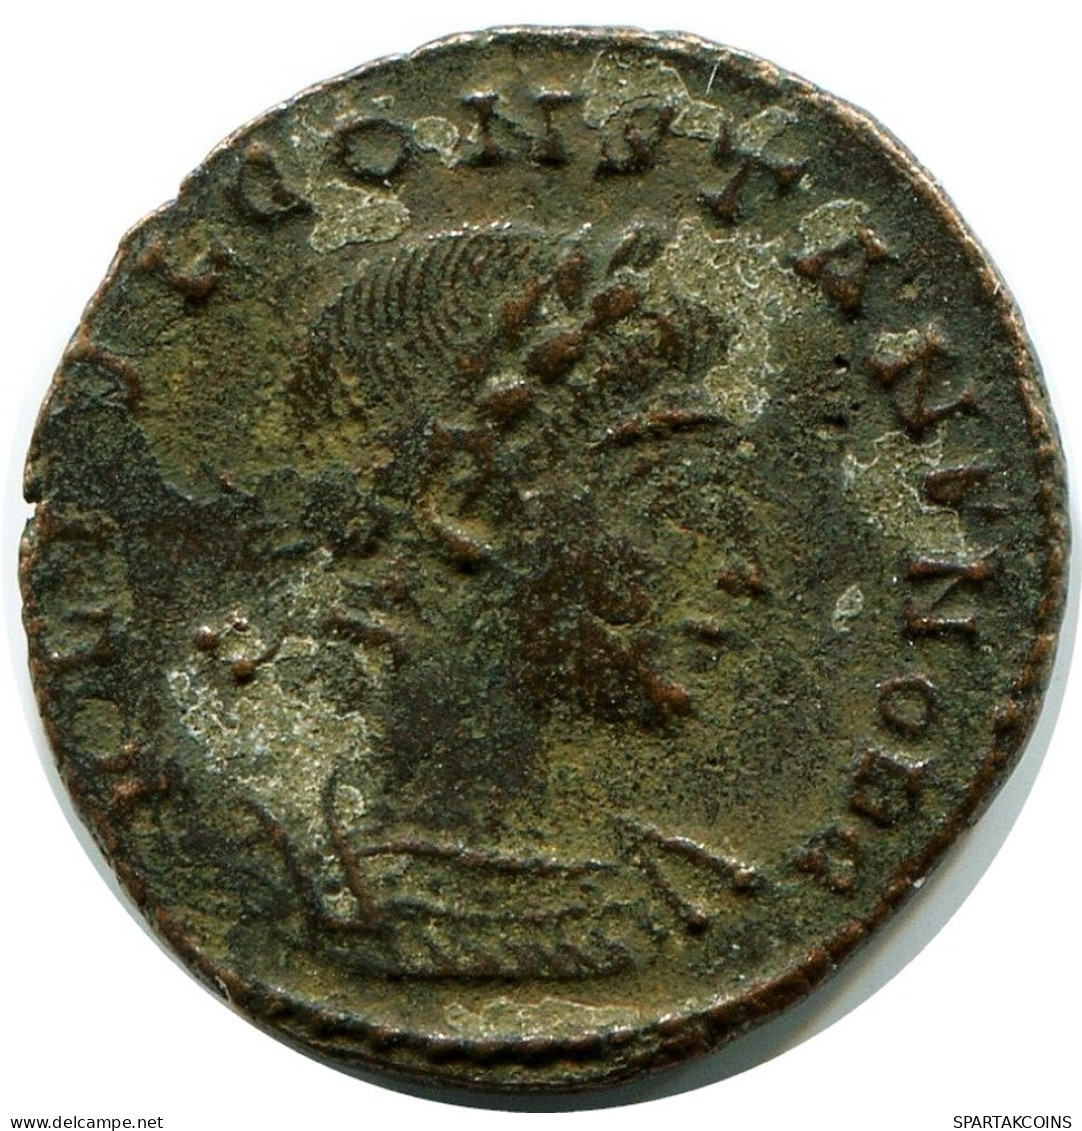 CONSTANS MINTED IN ALEKSANDRIA FROM THE ROYAL ONTARIO MUSEUM #ANC11343.14.U.A - El Imperio Christiano (307 / 363)